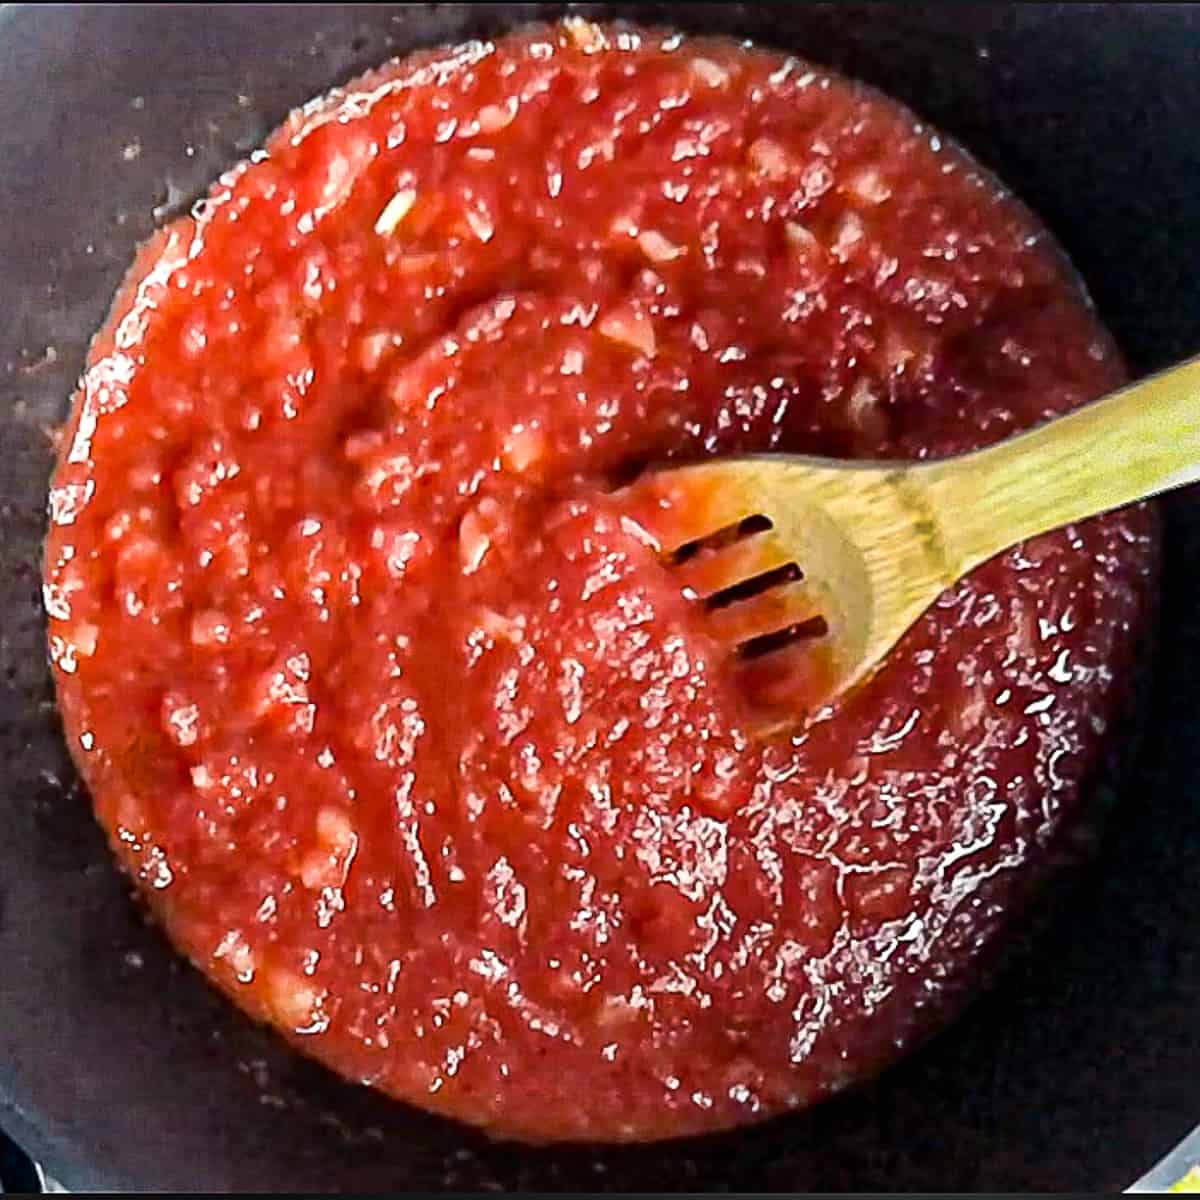 Homemade Pasta Sauce Recipe With Crushed Tomatoes - Sip Bite Go